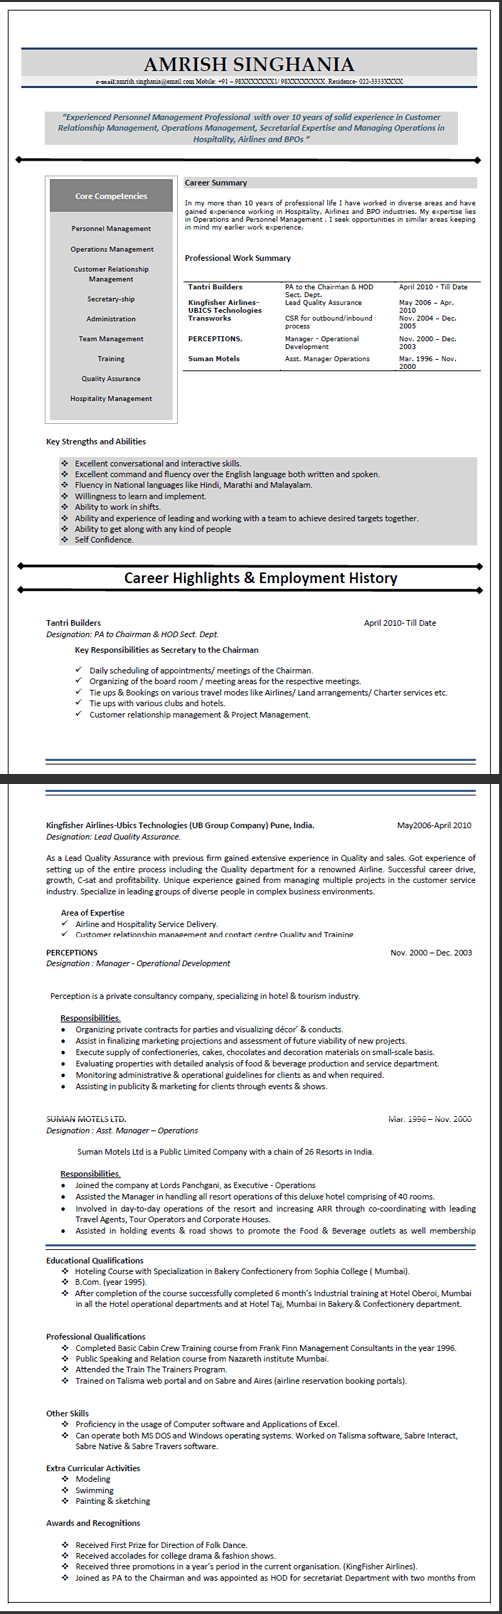 Resume Help - We'll help you with your resume writing